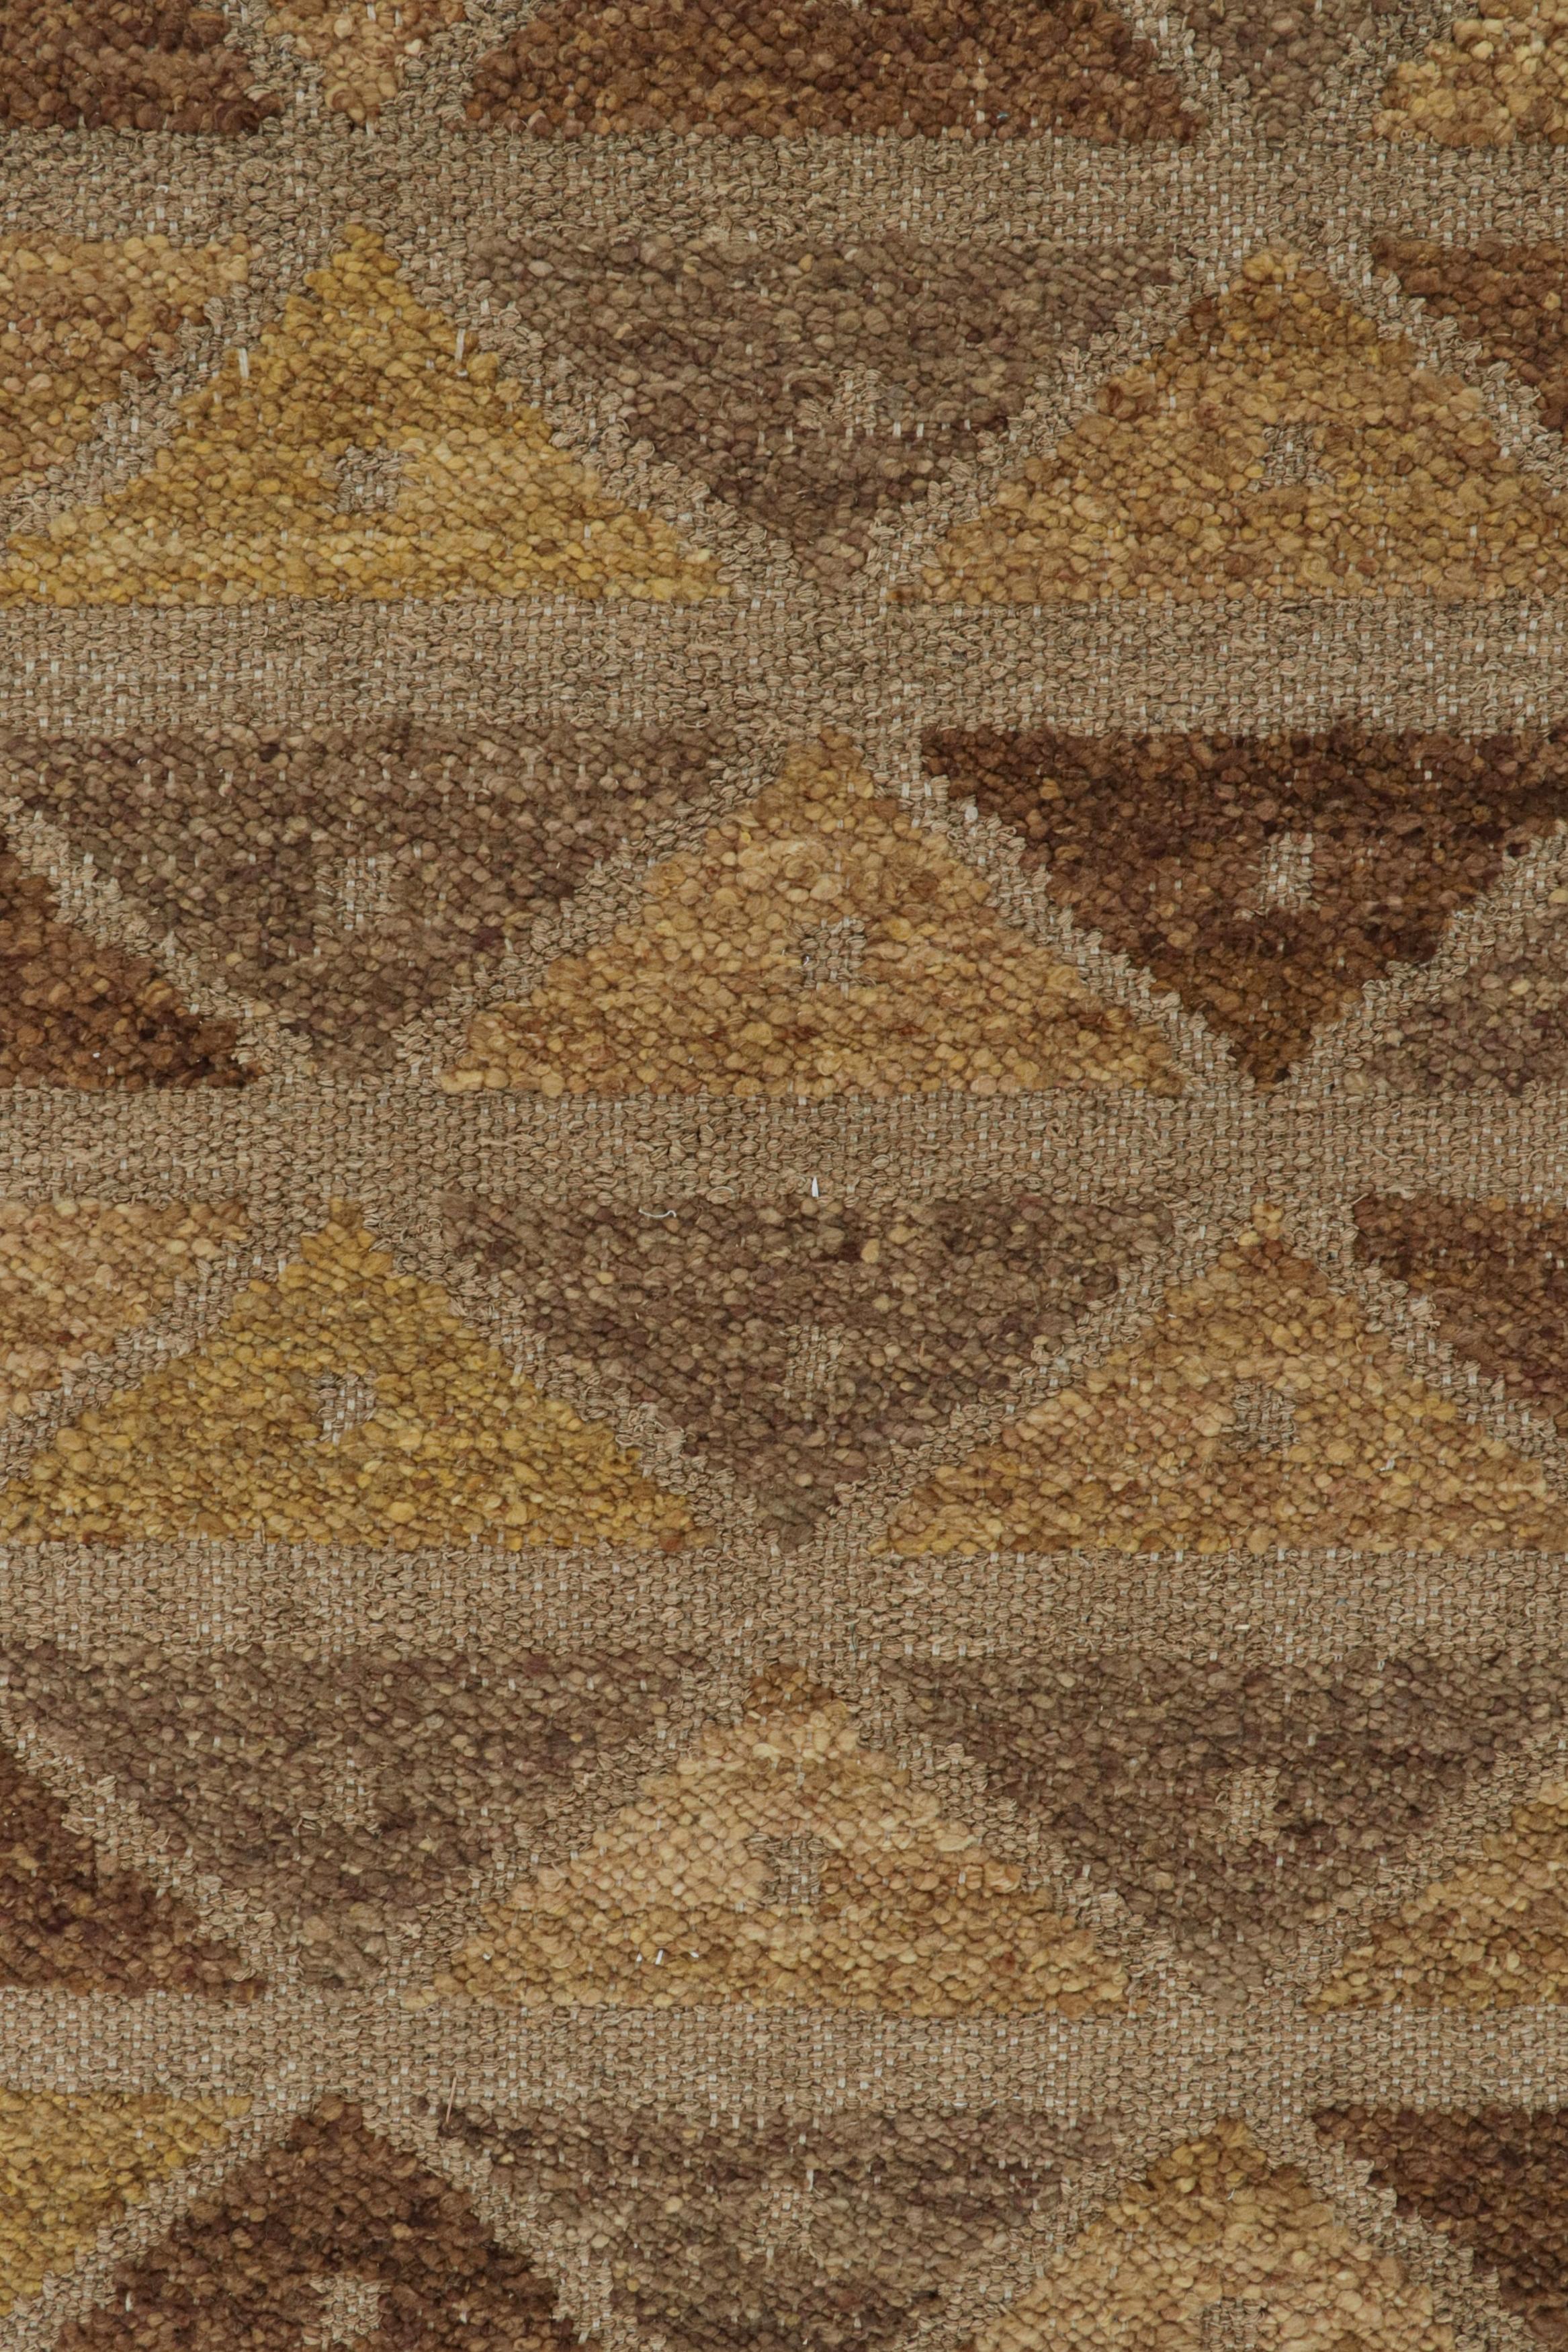 Contemporary Rug & Kilim’s Scandinavian Style Kilim with Brown & Gold Geometric Patterns For Sale